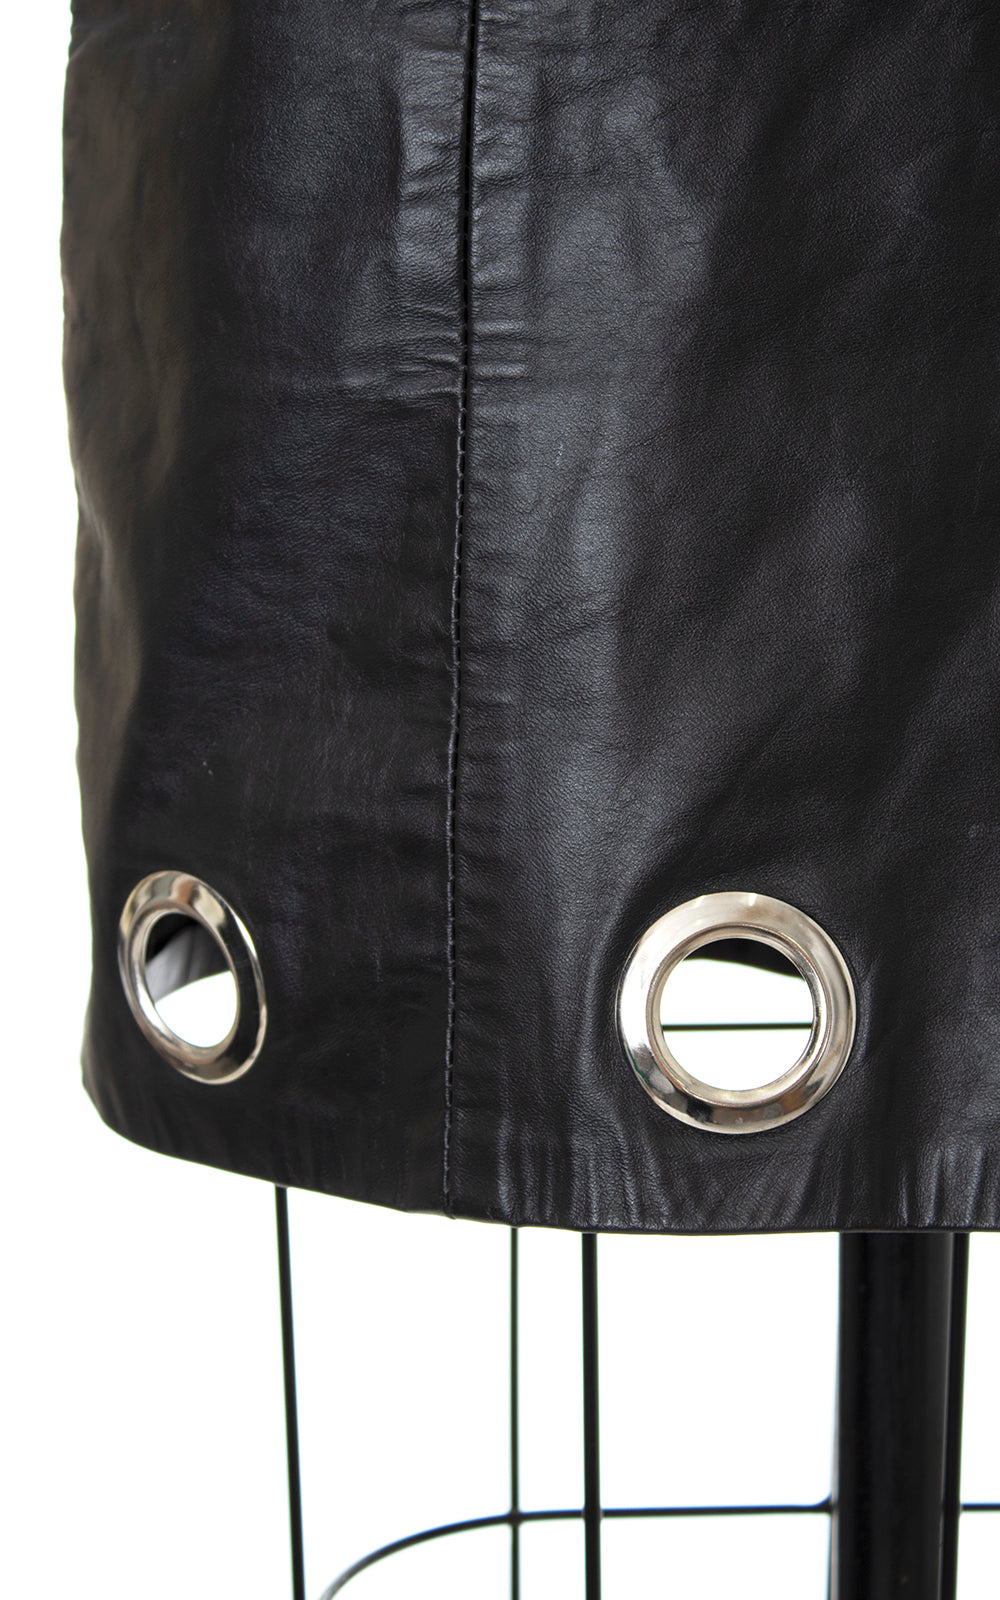 Vintage 1980s Black Leather Mini Skirt with Grommets by Birthday Life Vintage